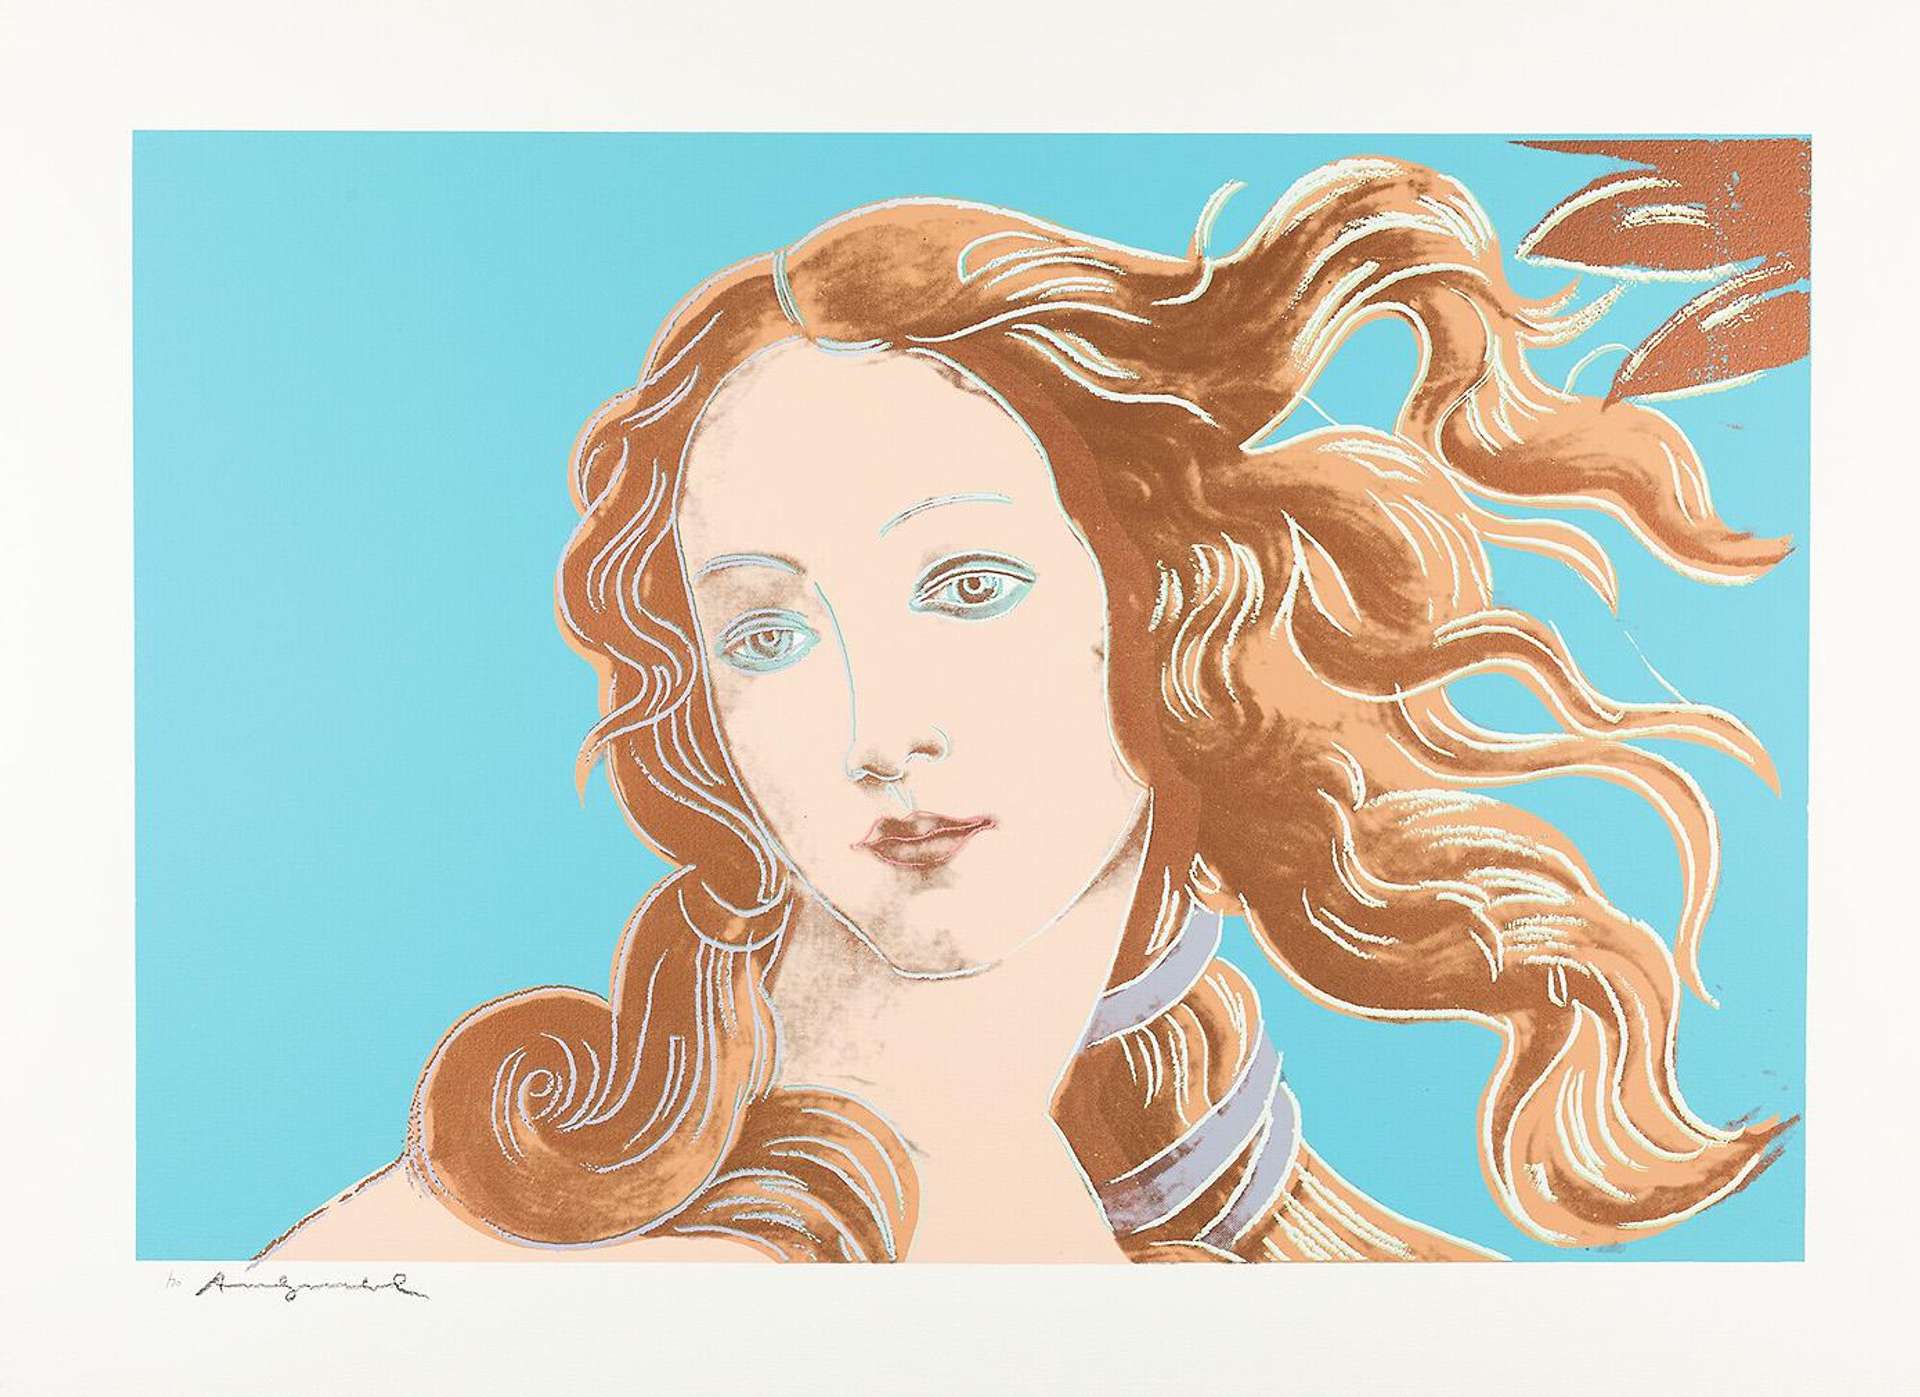 A close-up view of Botticelli's Venus, showing her face and flowing hair. The background is done in a light teal, while her hair is in tones of yellow and orange.